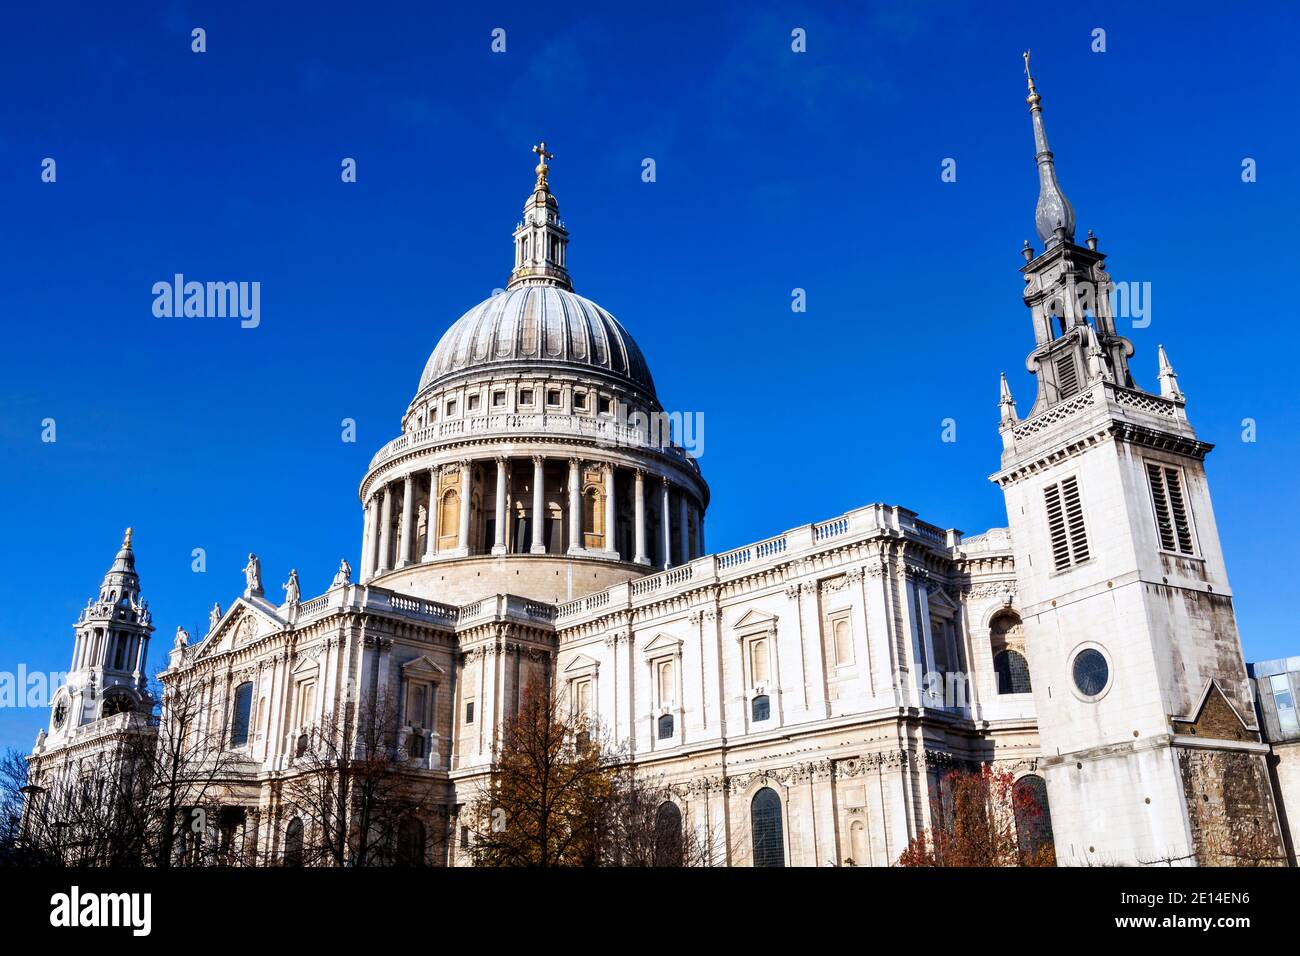 St Paul’s Cathedral  in London England UK built by Sir Christopher Wren which a popular tourism travel destination visitor landmark of the city stock Stock Photo